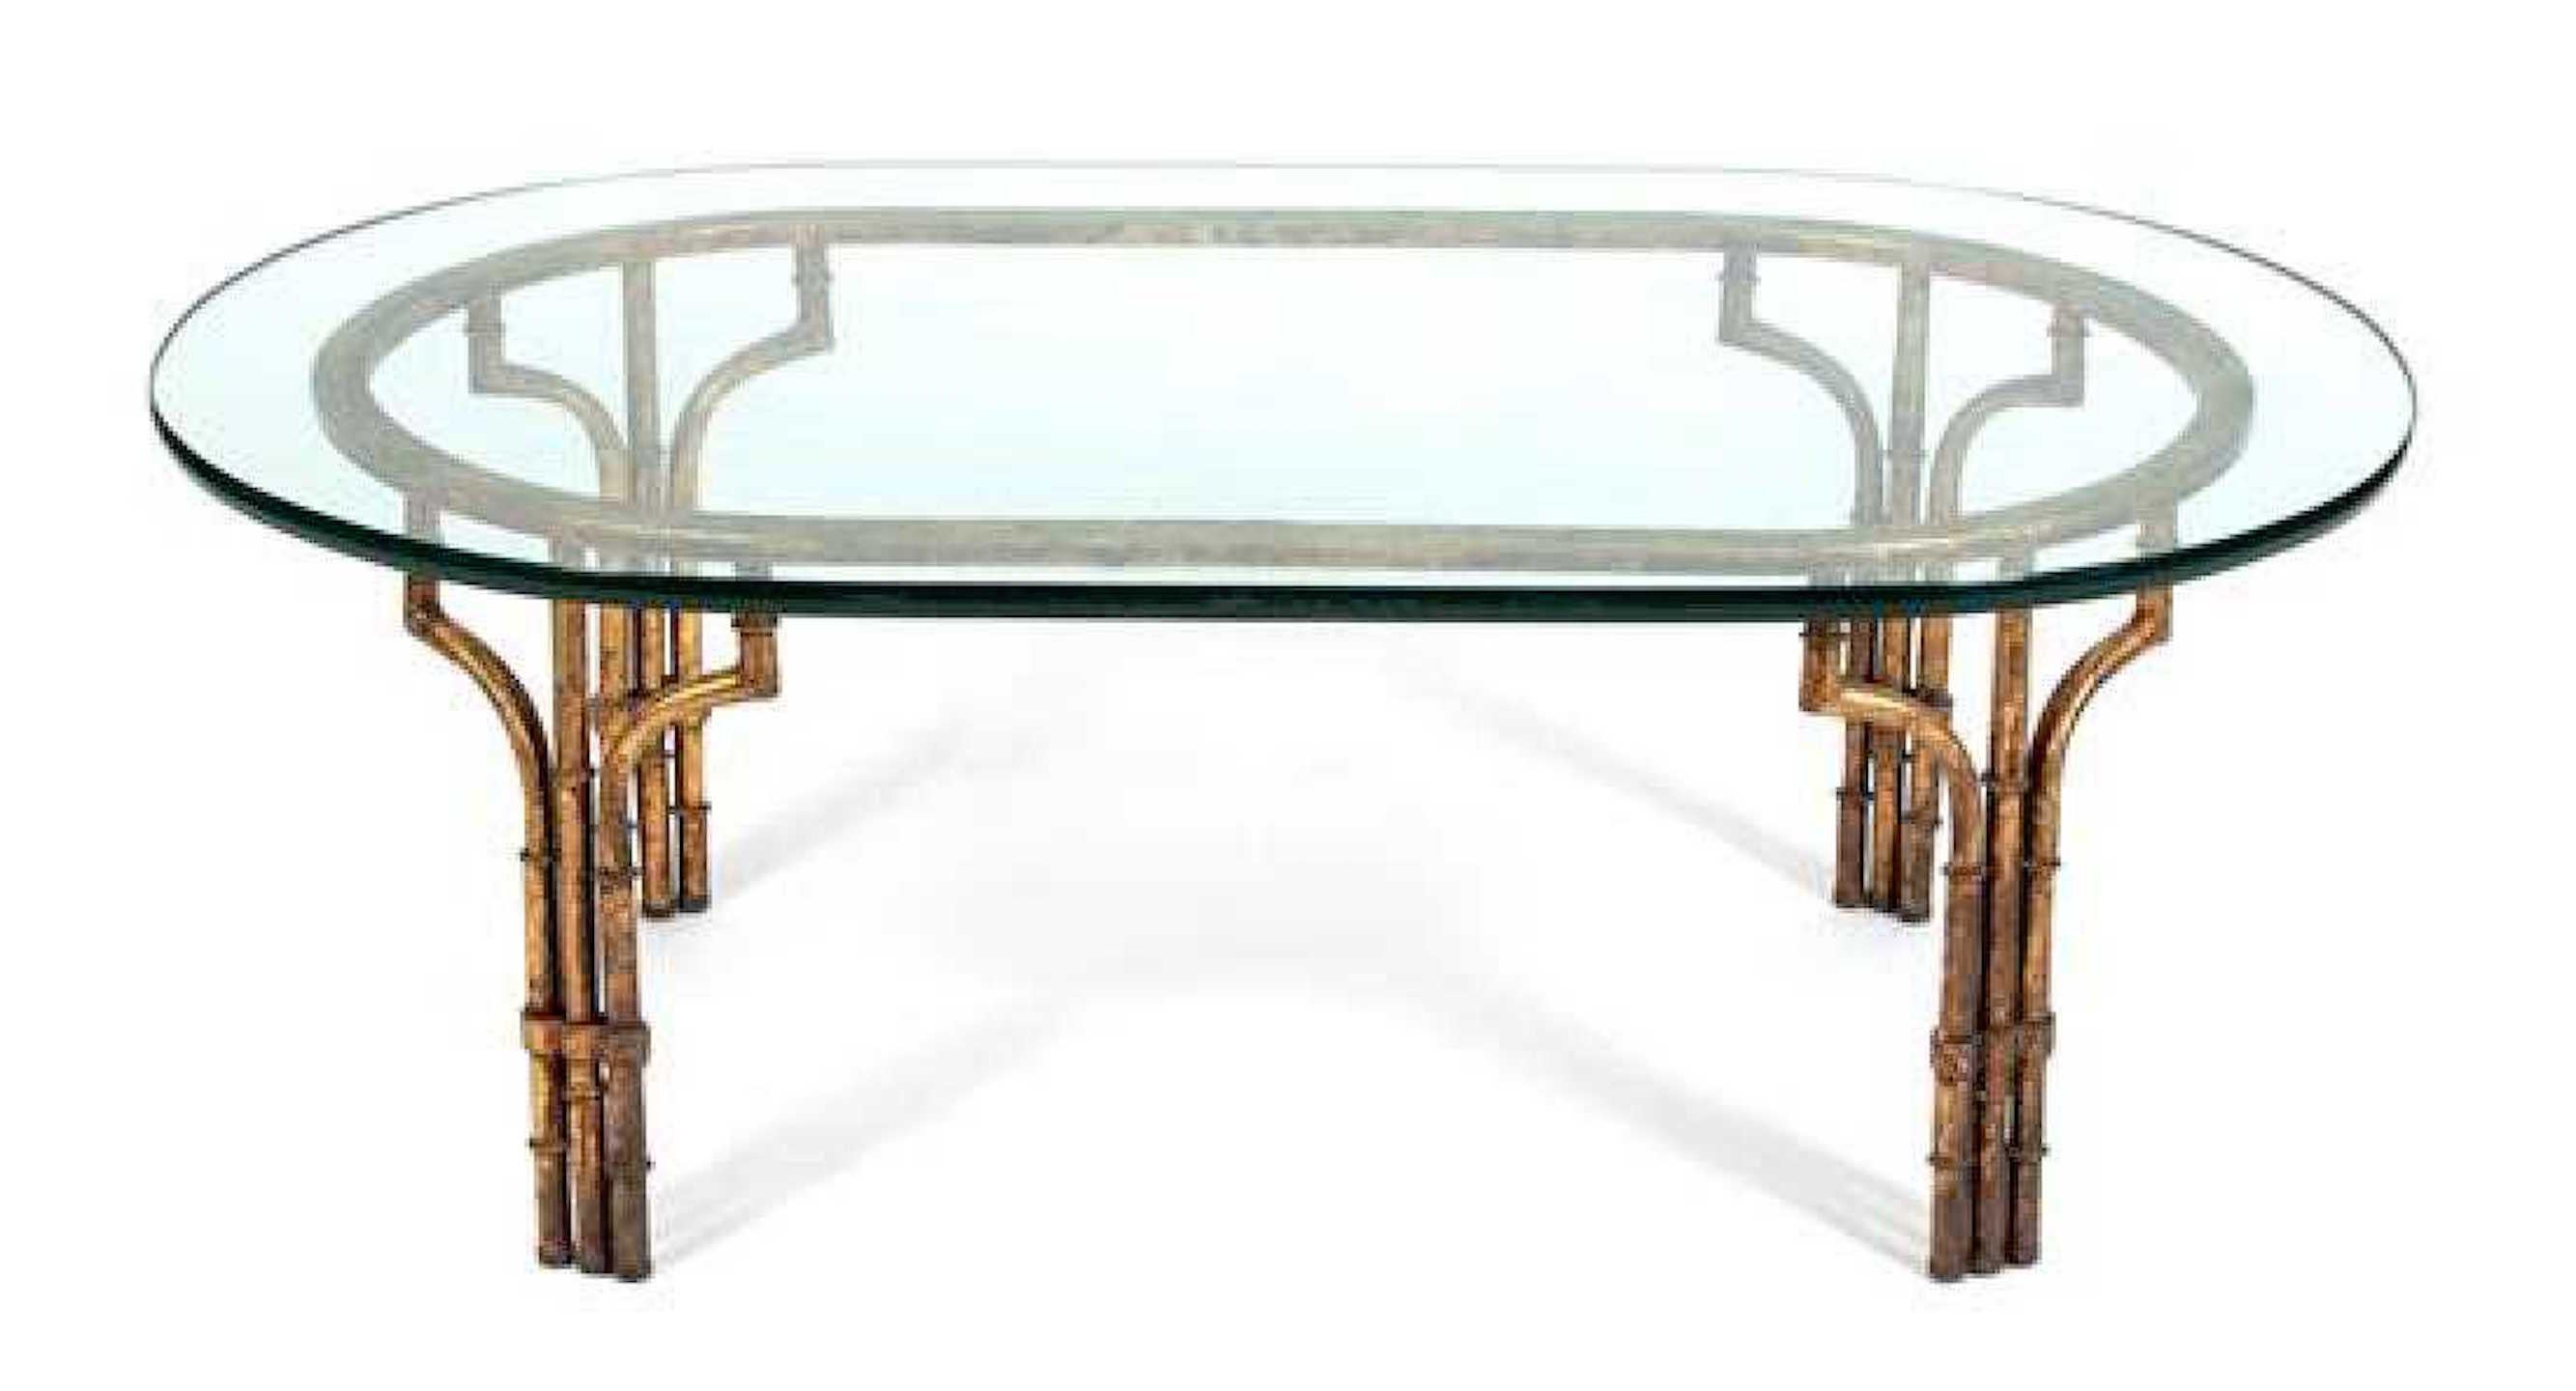 Midcentury Italian gilt metal faux- bamboo glass top coffee table
With thick oval glass top on conforming base.
   